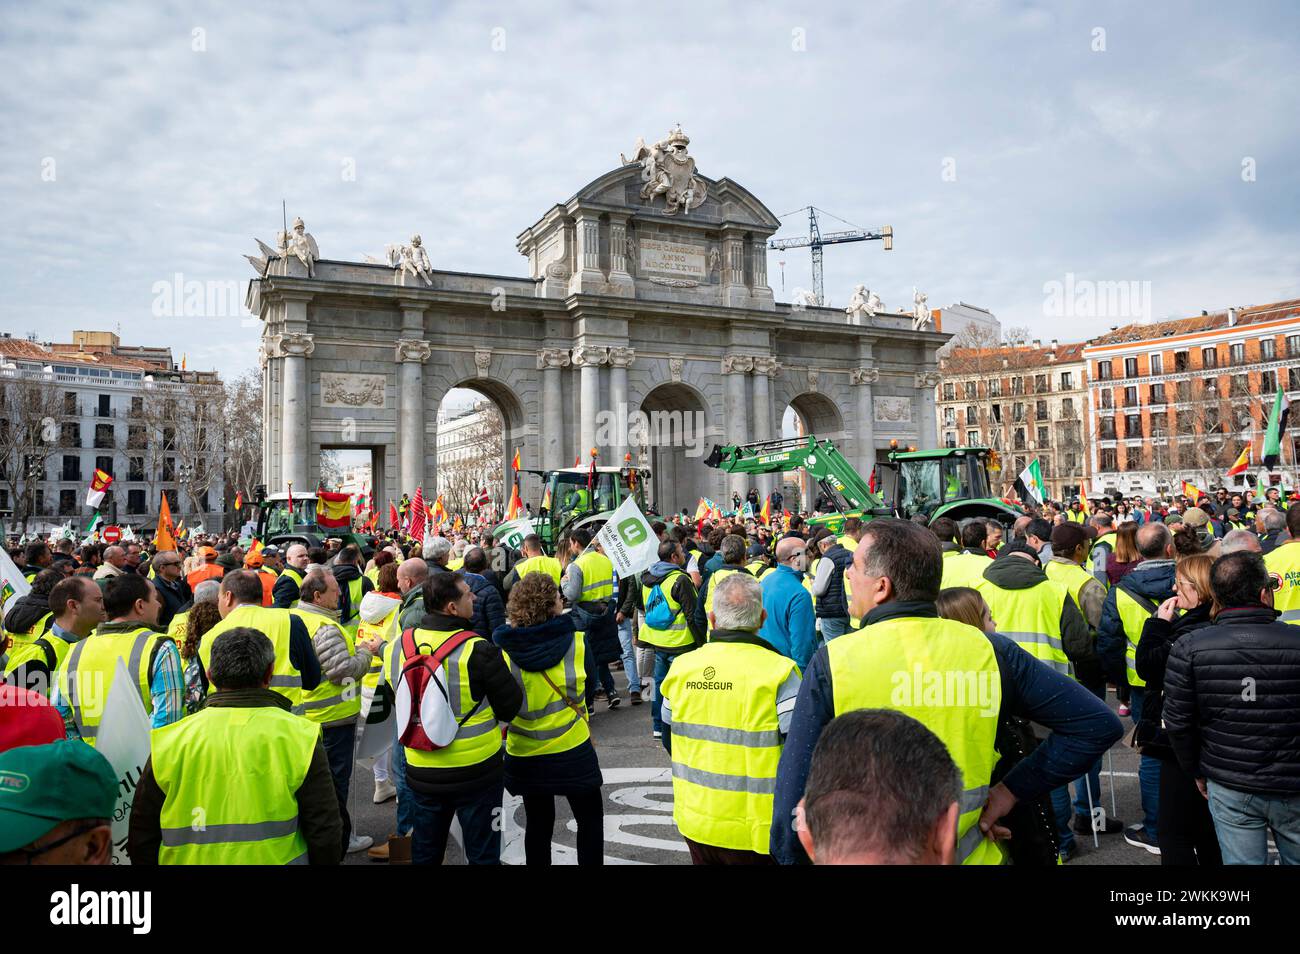 Spanish farmer demonstration in Madrid Protesters with tractors seen during the farmers demonstration in Puerta de Alcala in Madrid the protest, organized by Spanish trade unions, is focused on concerns over unfair competition from products originating outside the EU. Farmers are also unhappy about the meager profits derived from their crops and are critical of EU agricultural policy. Madrid Puerta de Alcala Madrid Spain Copyright: xAlbertoxGardinx AGardin 20240221 manifestacion tractores madrid 052 Stock Photo